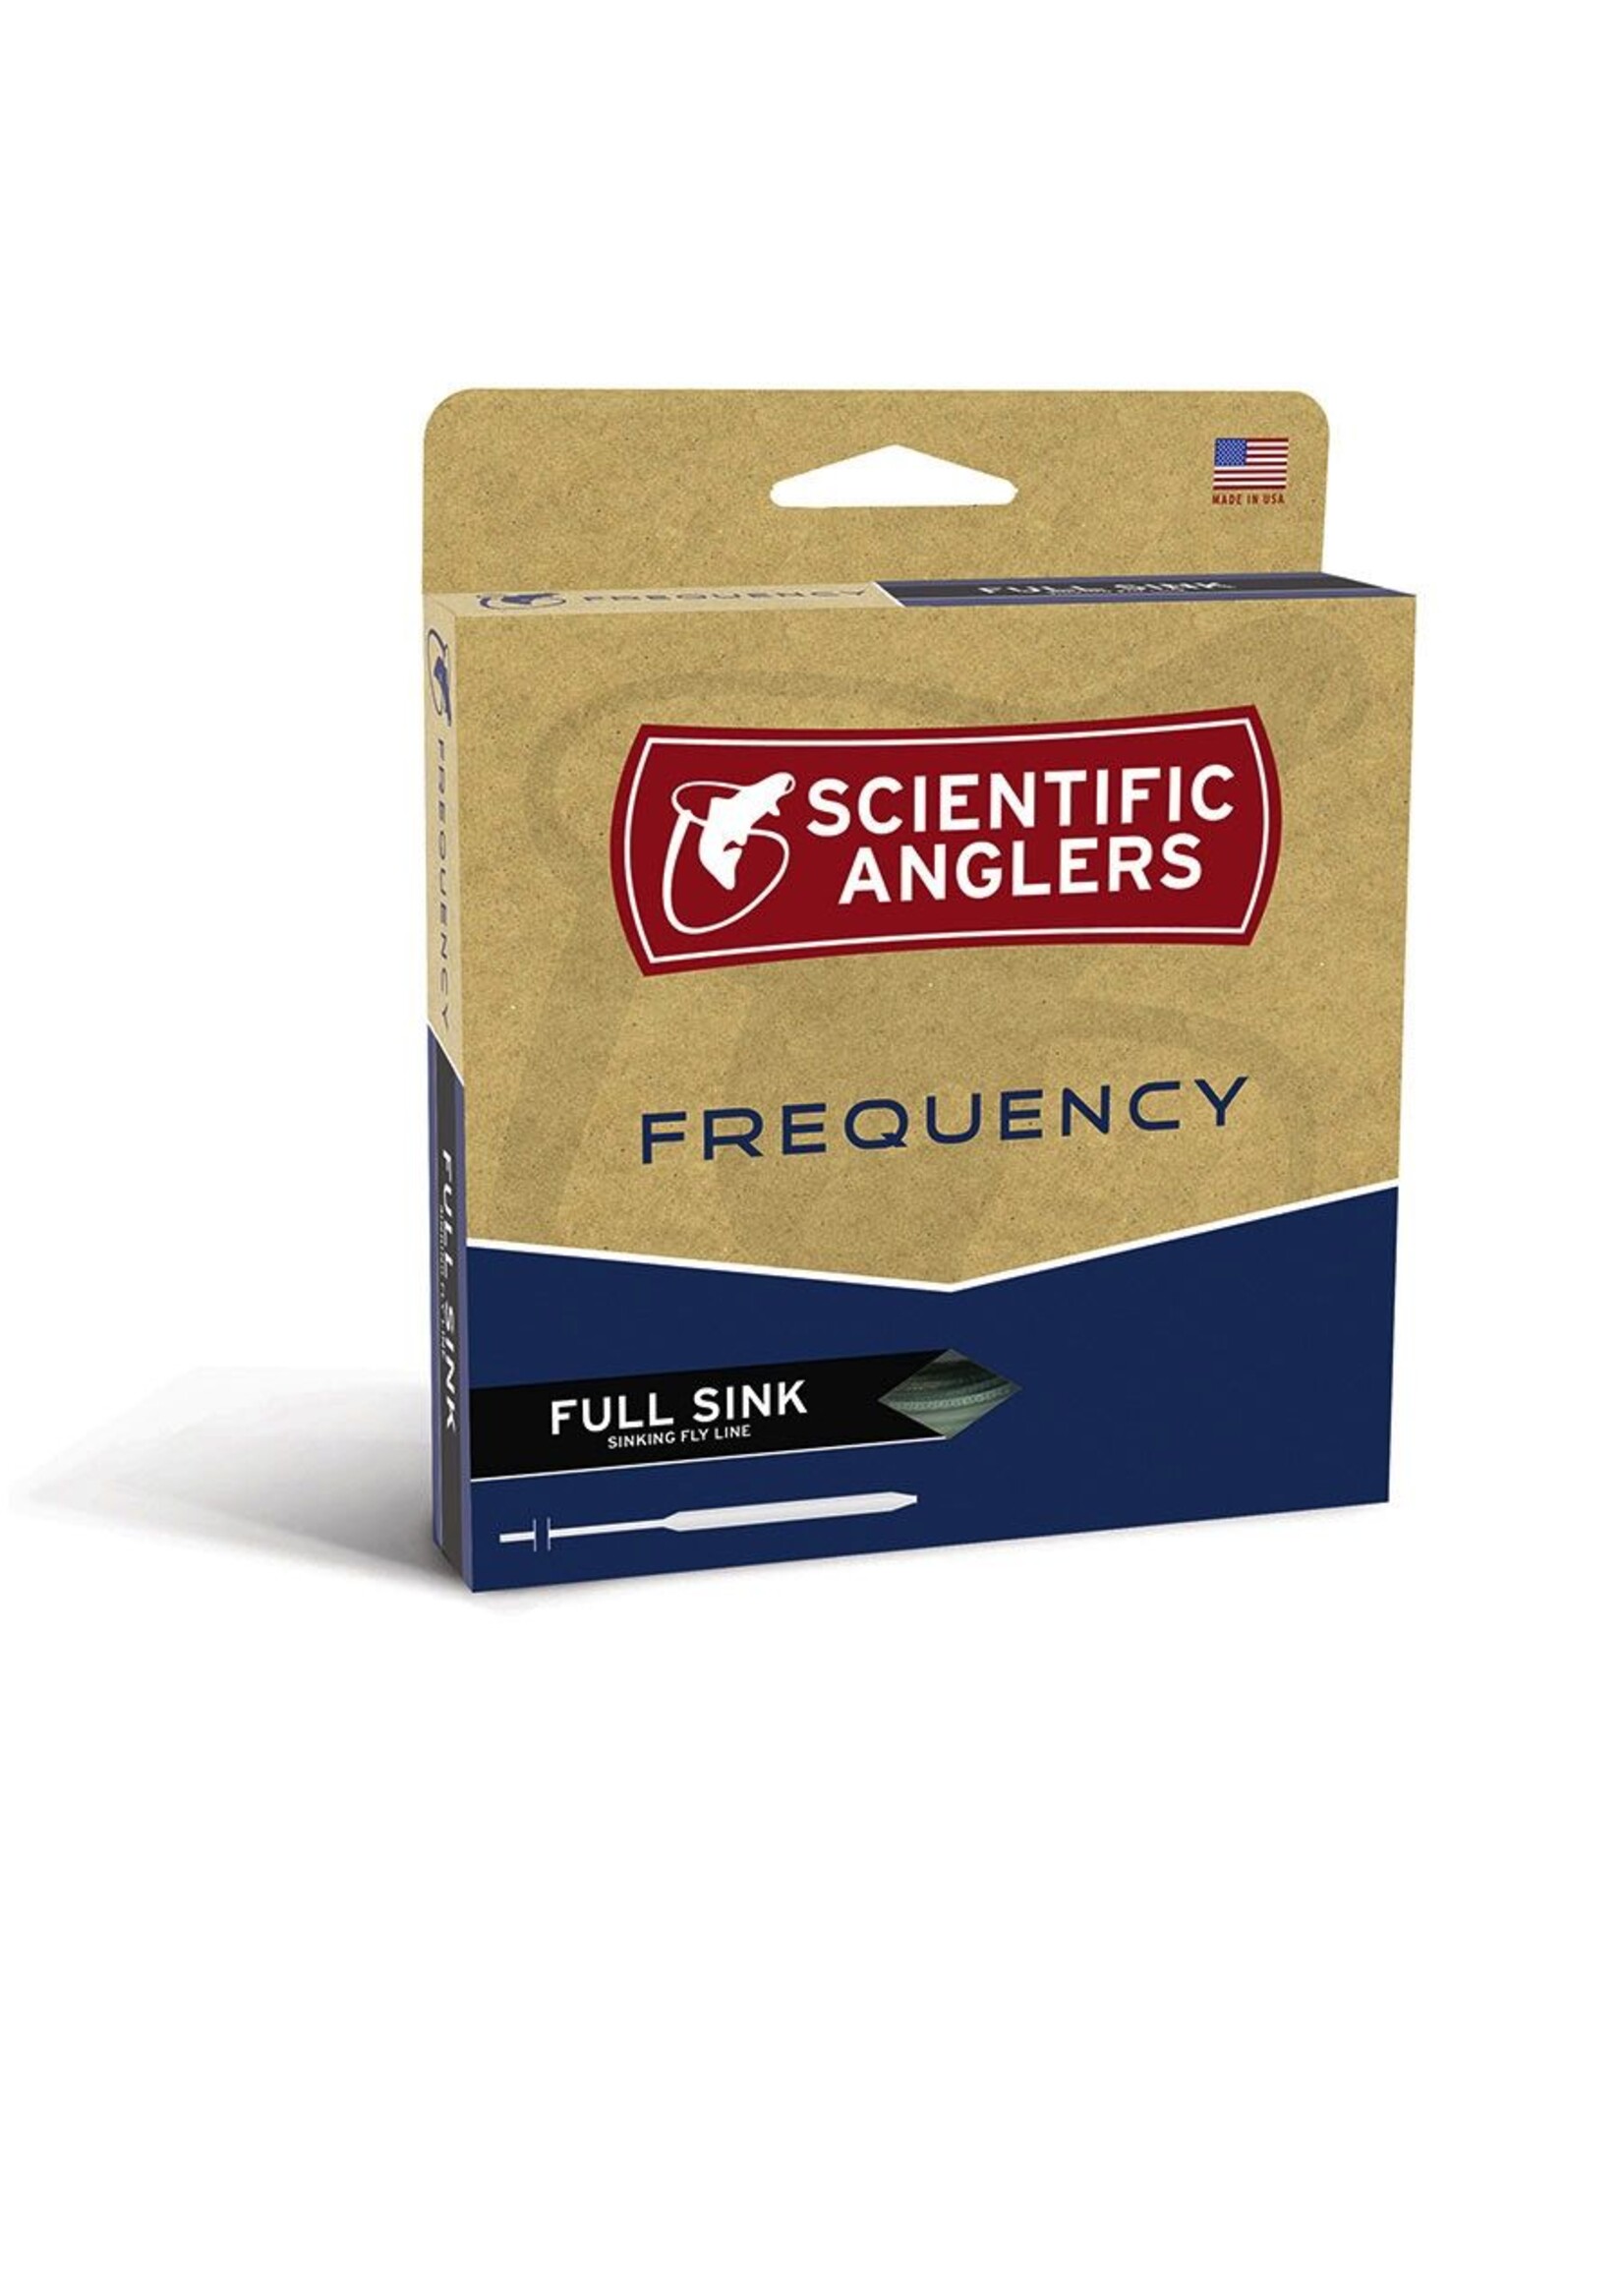 SCIENTIFIC ANGLERS SCIENTIFIC ANGLERS FREQUENCY FULL SINKING